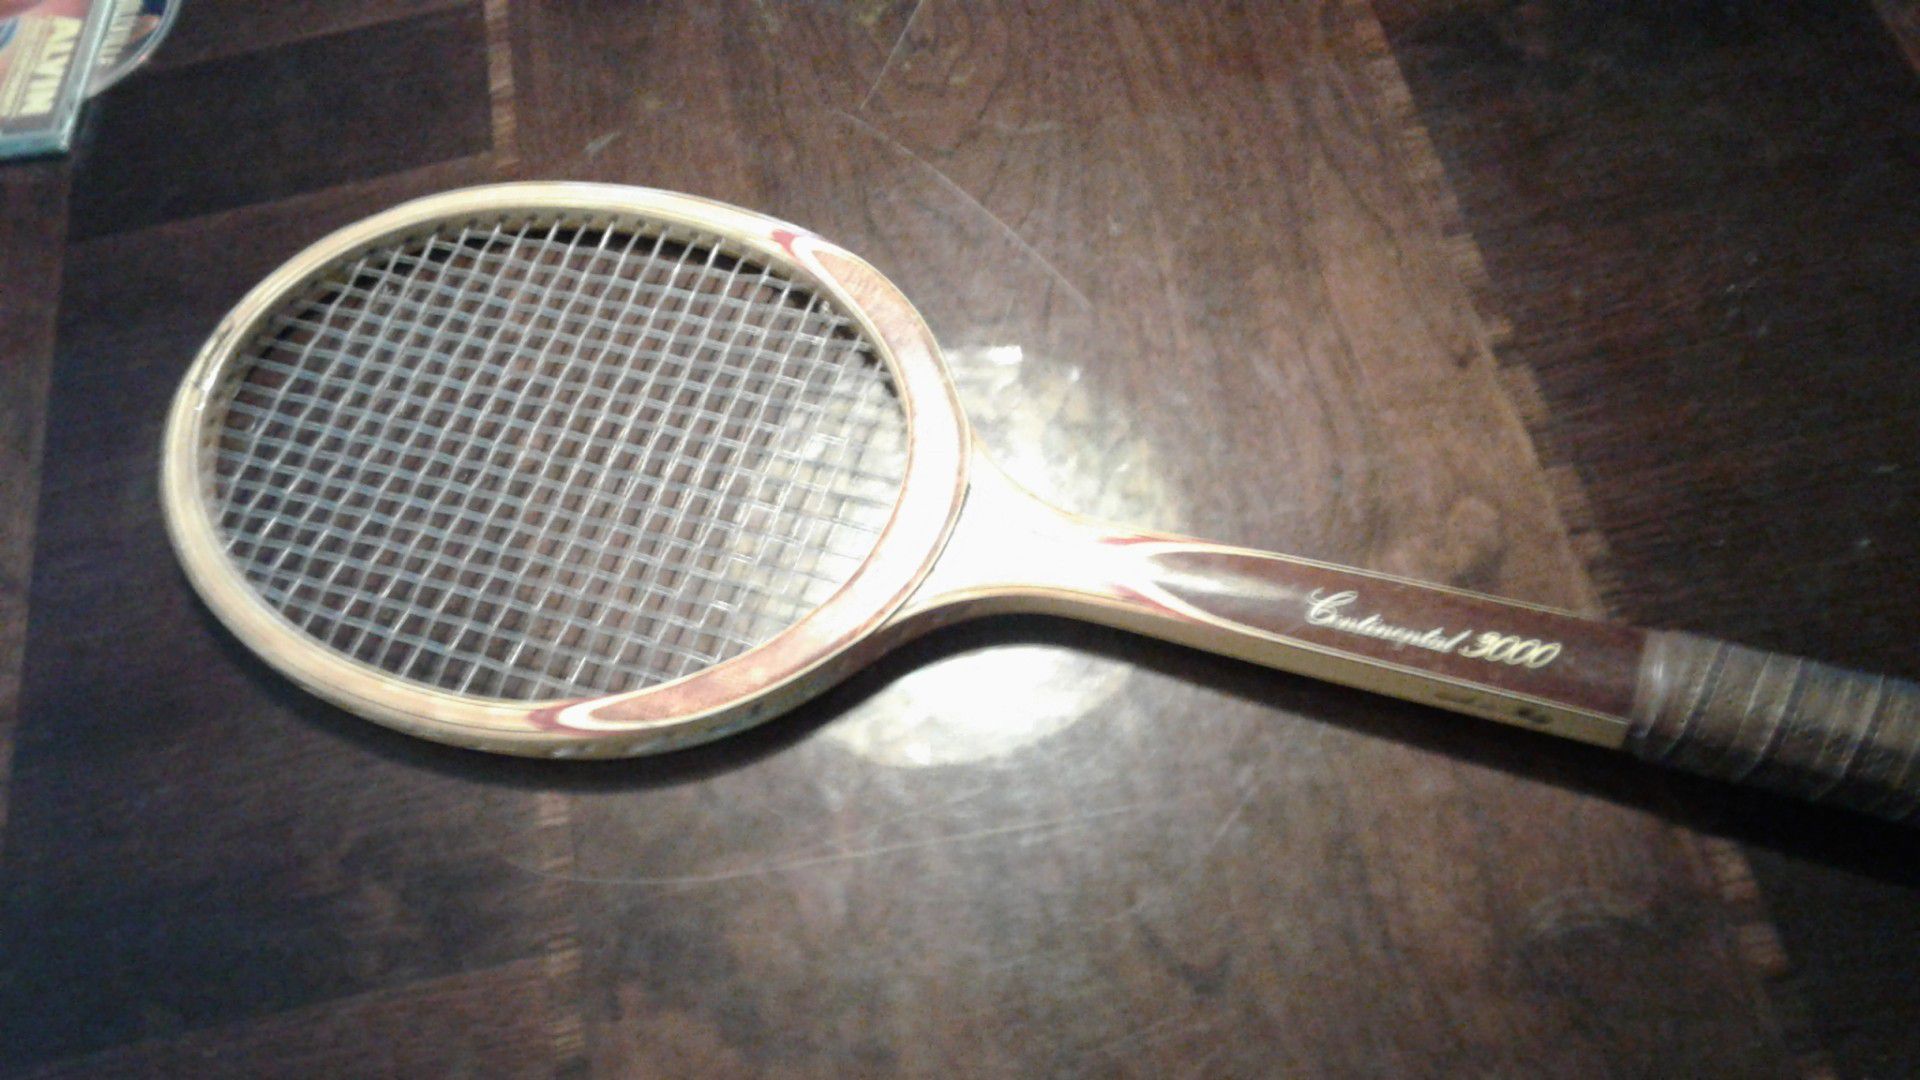 Handcrafted Centinental 3000 Tennis Racket